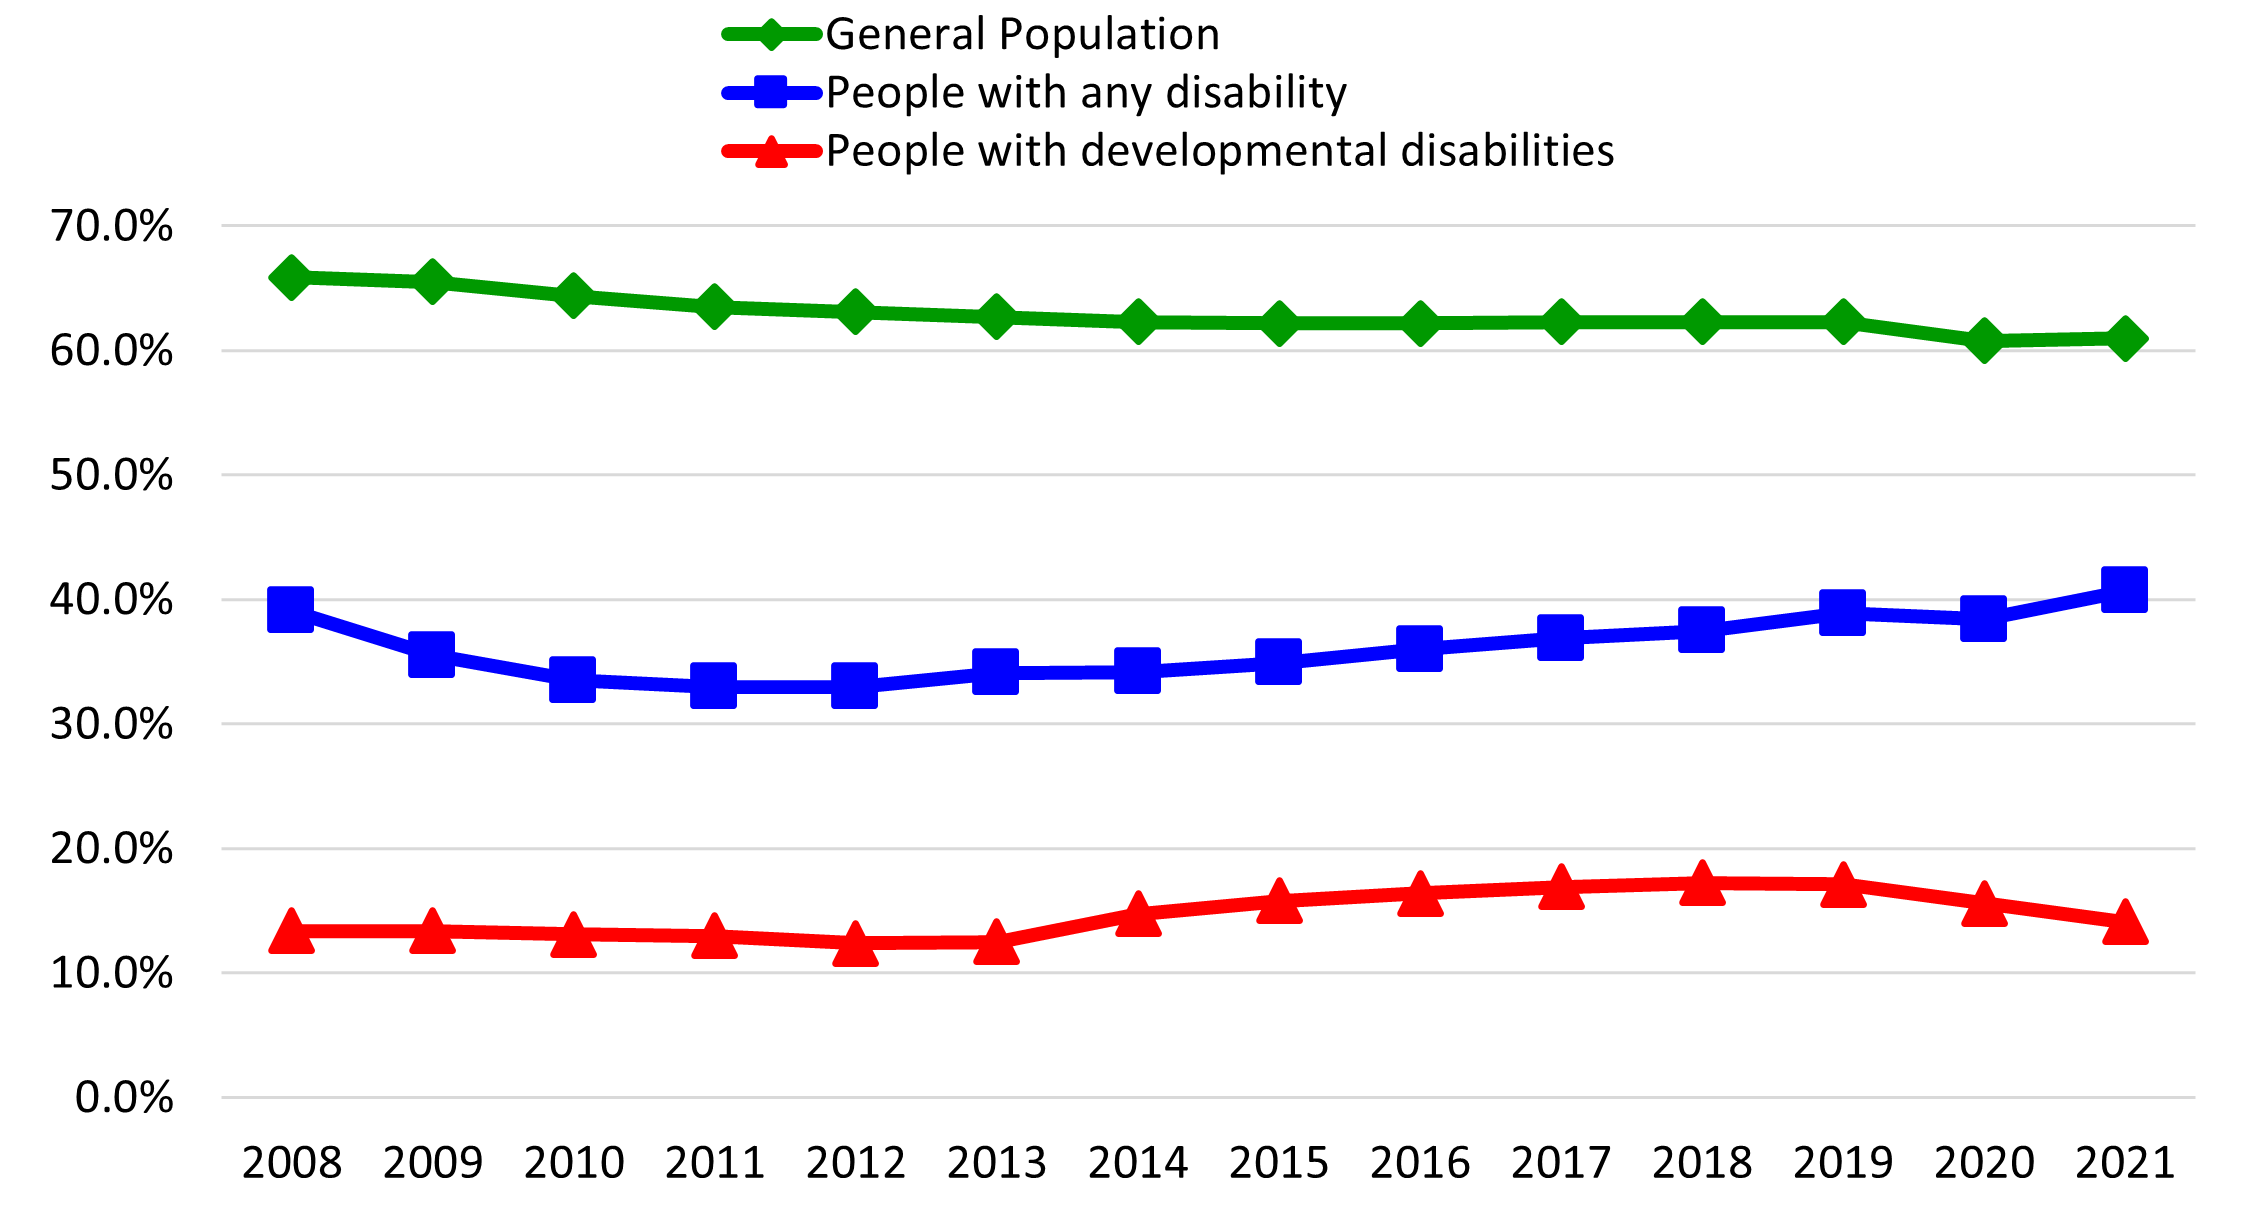 Line graph of California Employment Rates, General Population vs. People with Any Disability vs. People with Developmental Disabilities using data from the above table.